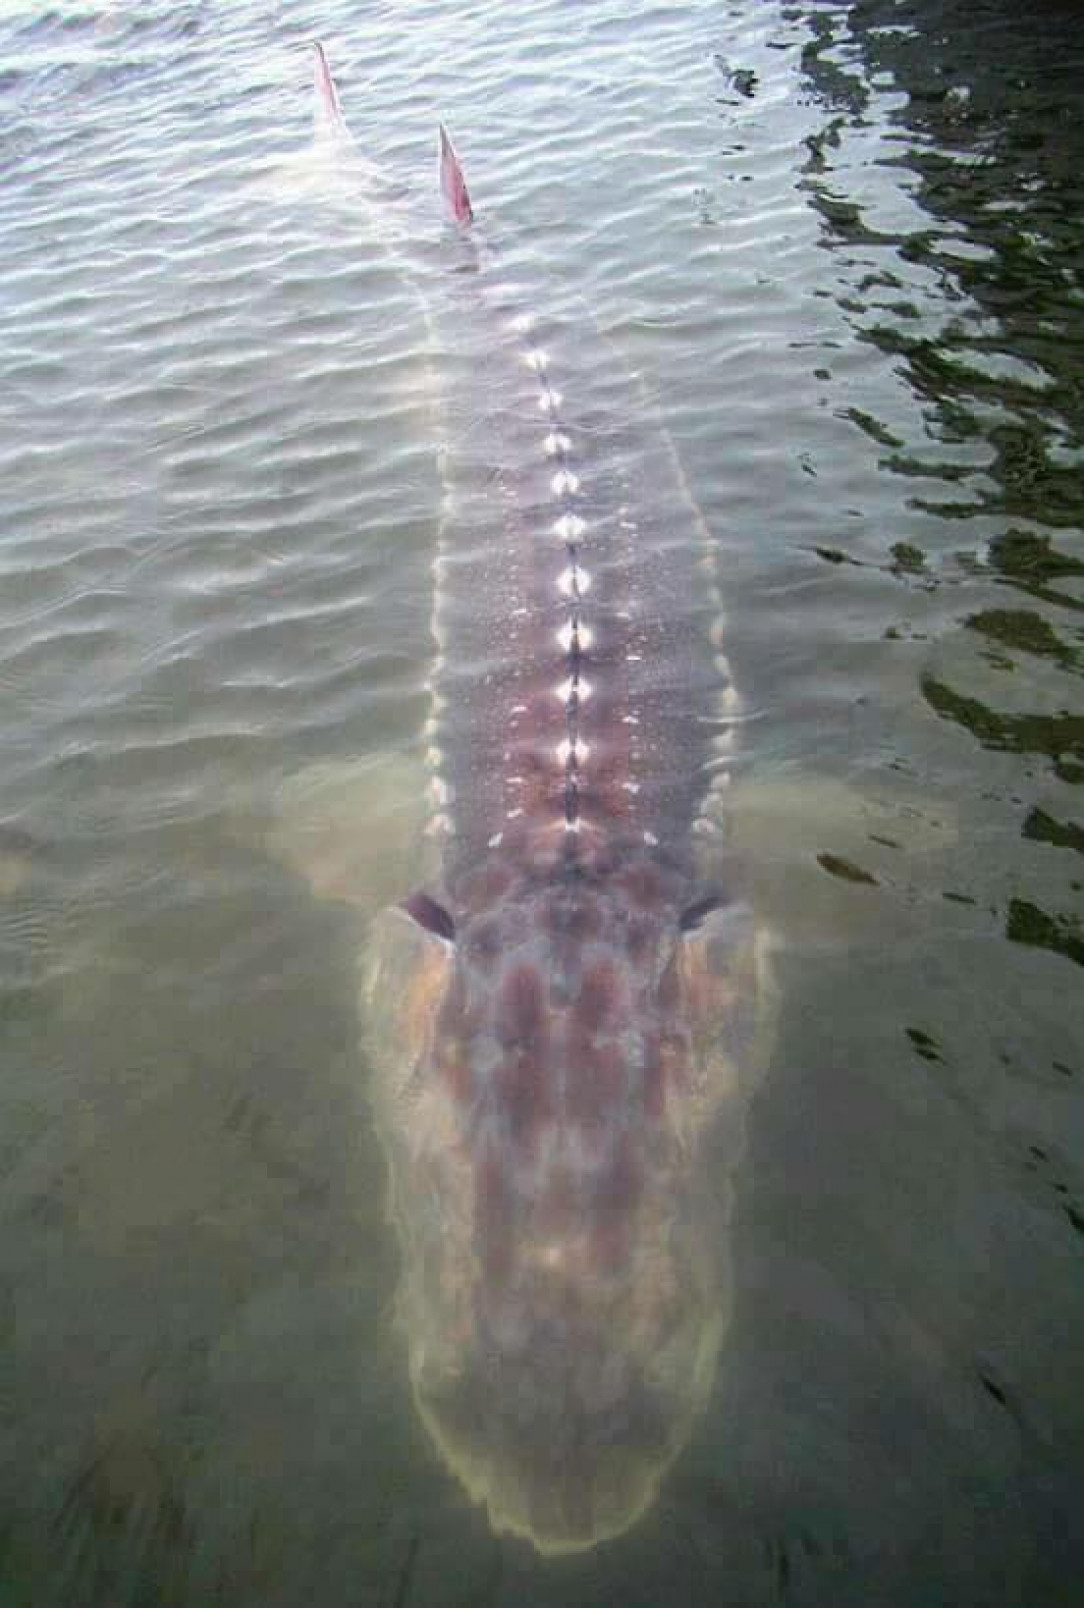 Giant sturgeon in the Fraser River, Canada